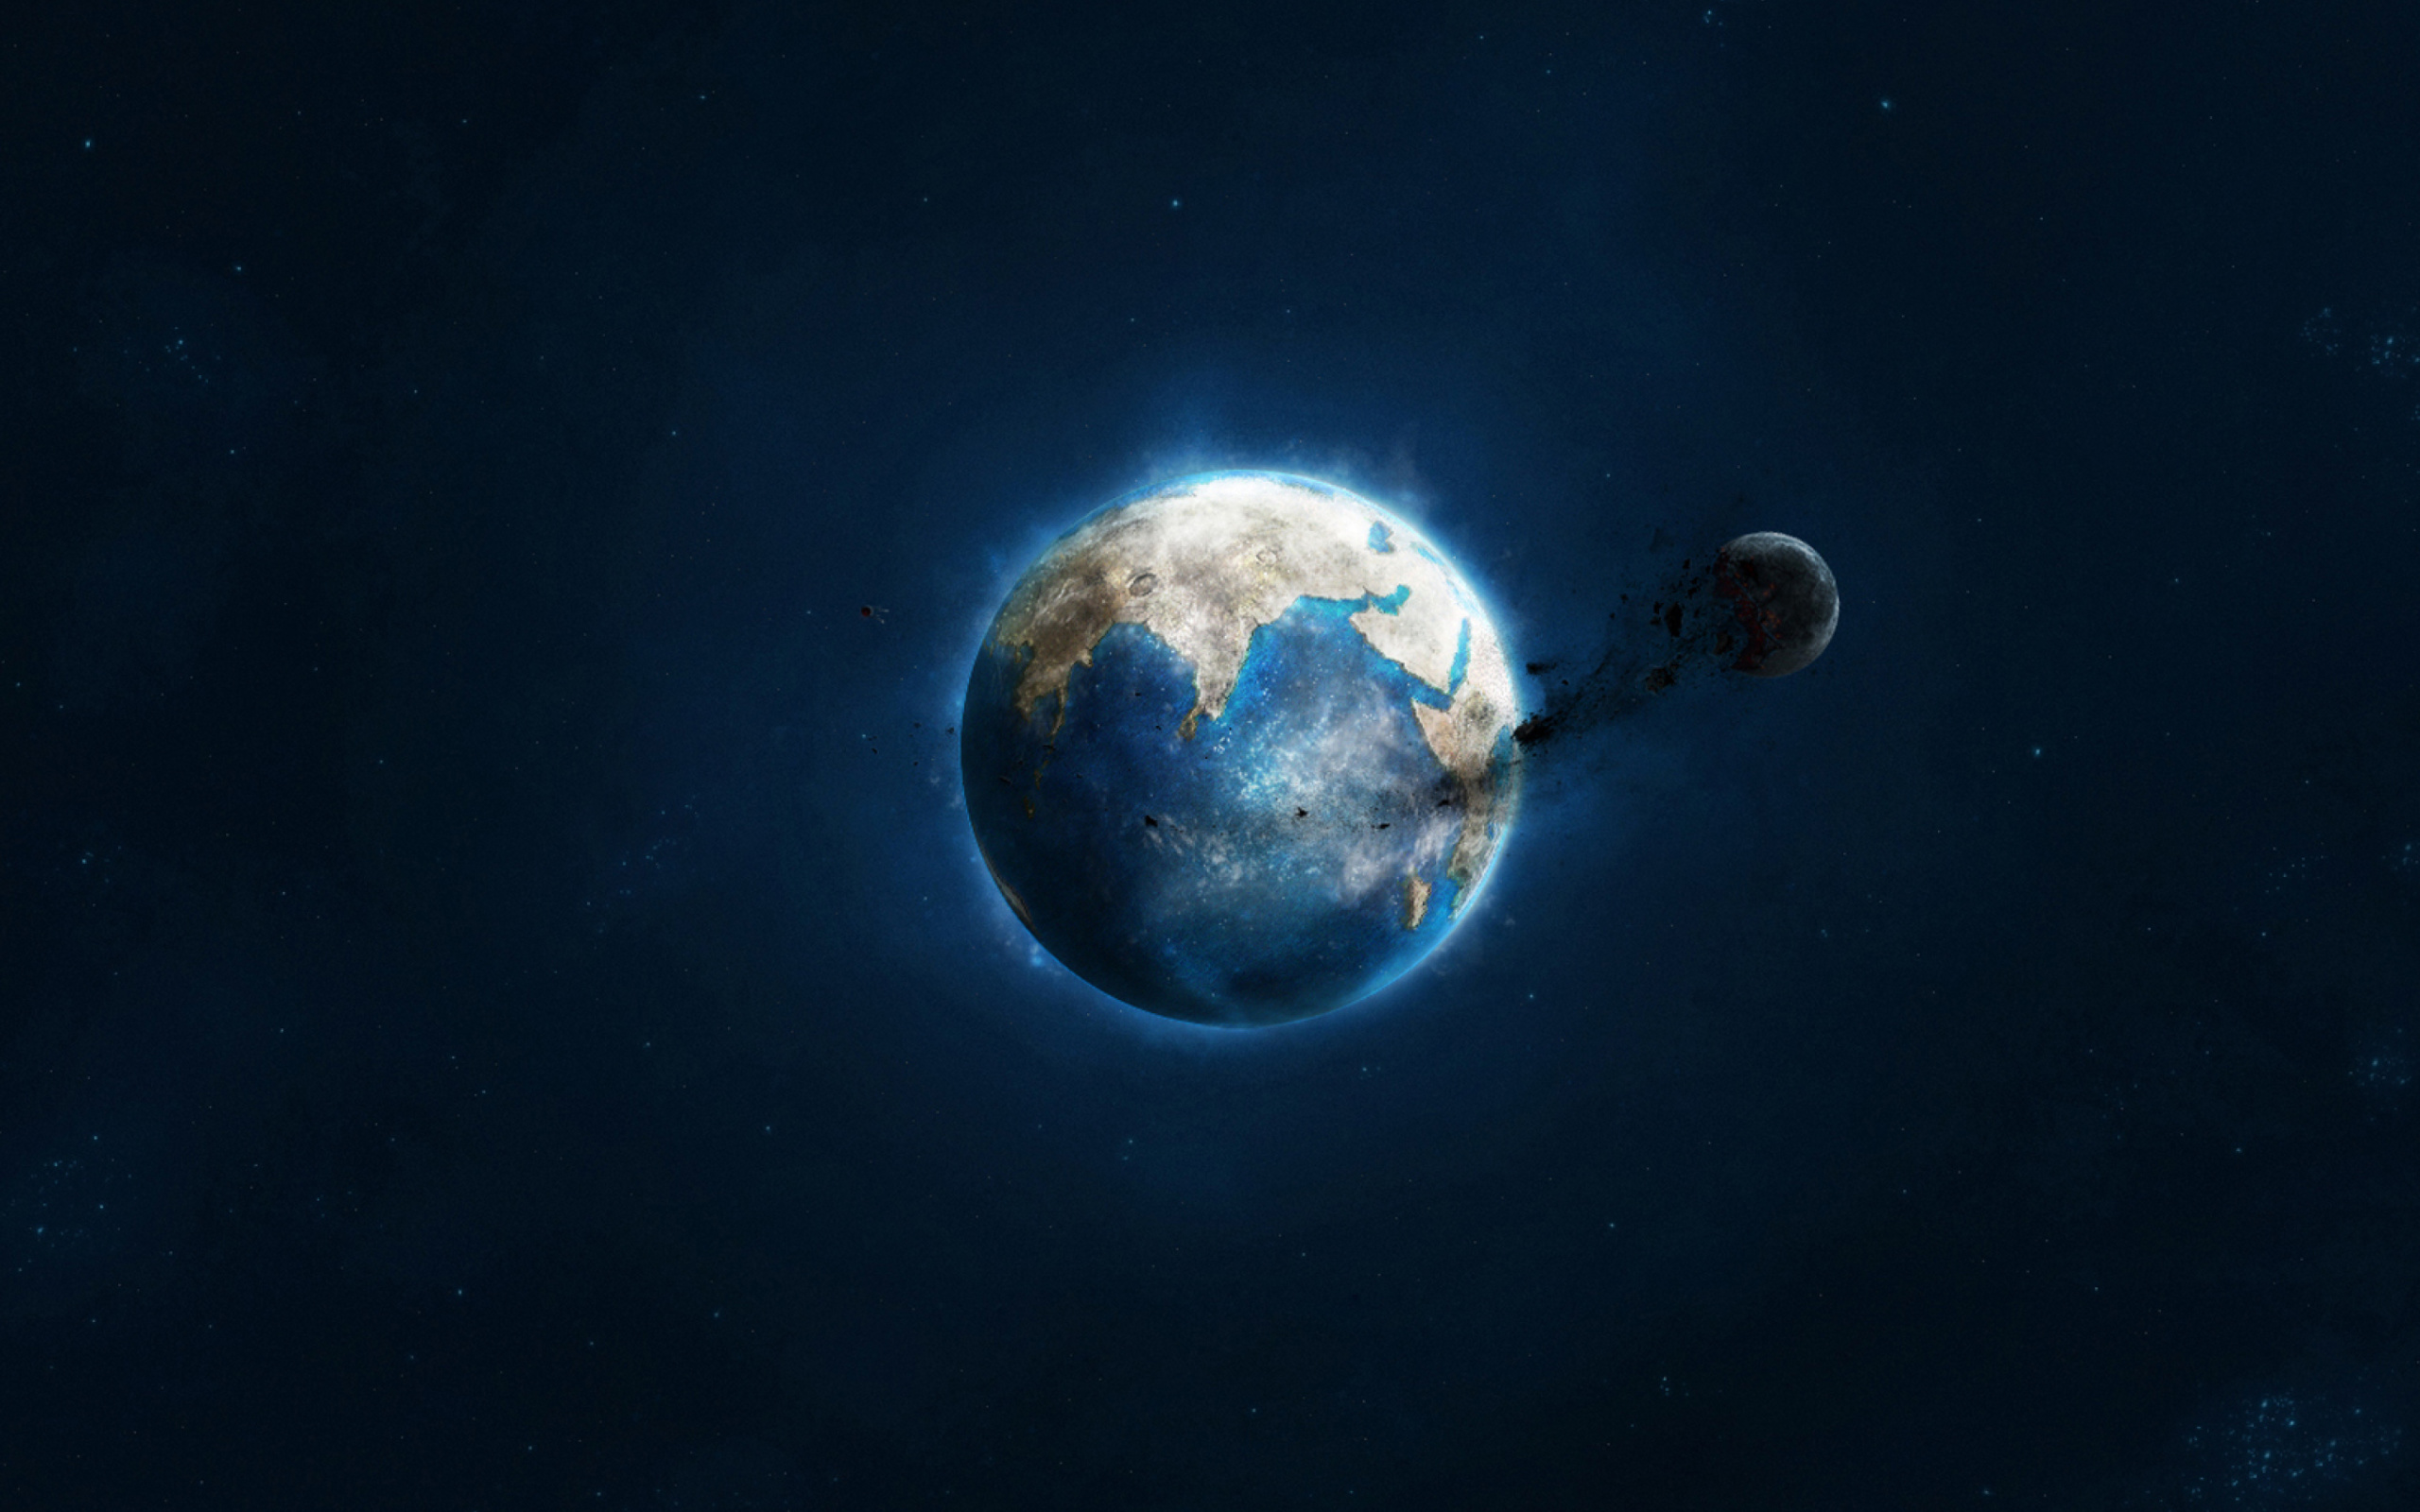 Das Planet and Asteroid Wallpaper 2560x1600